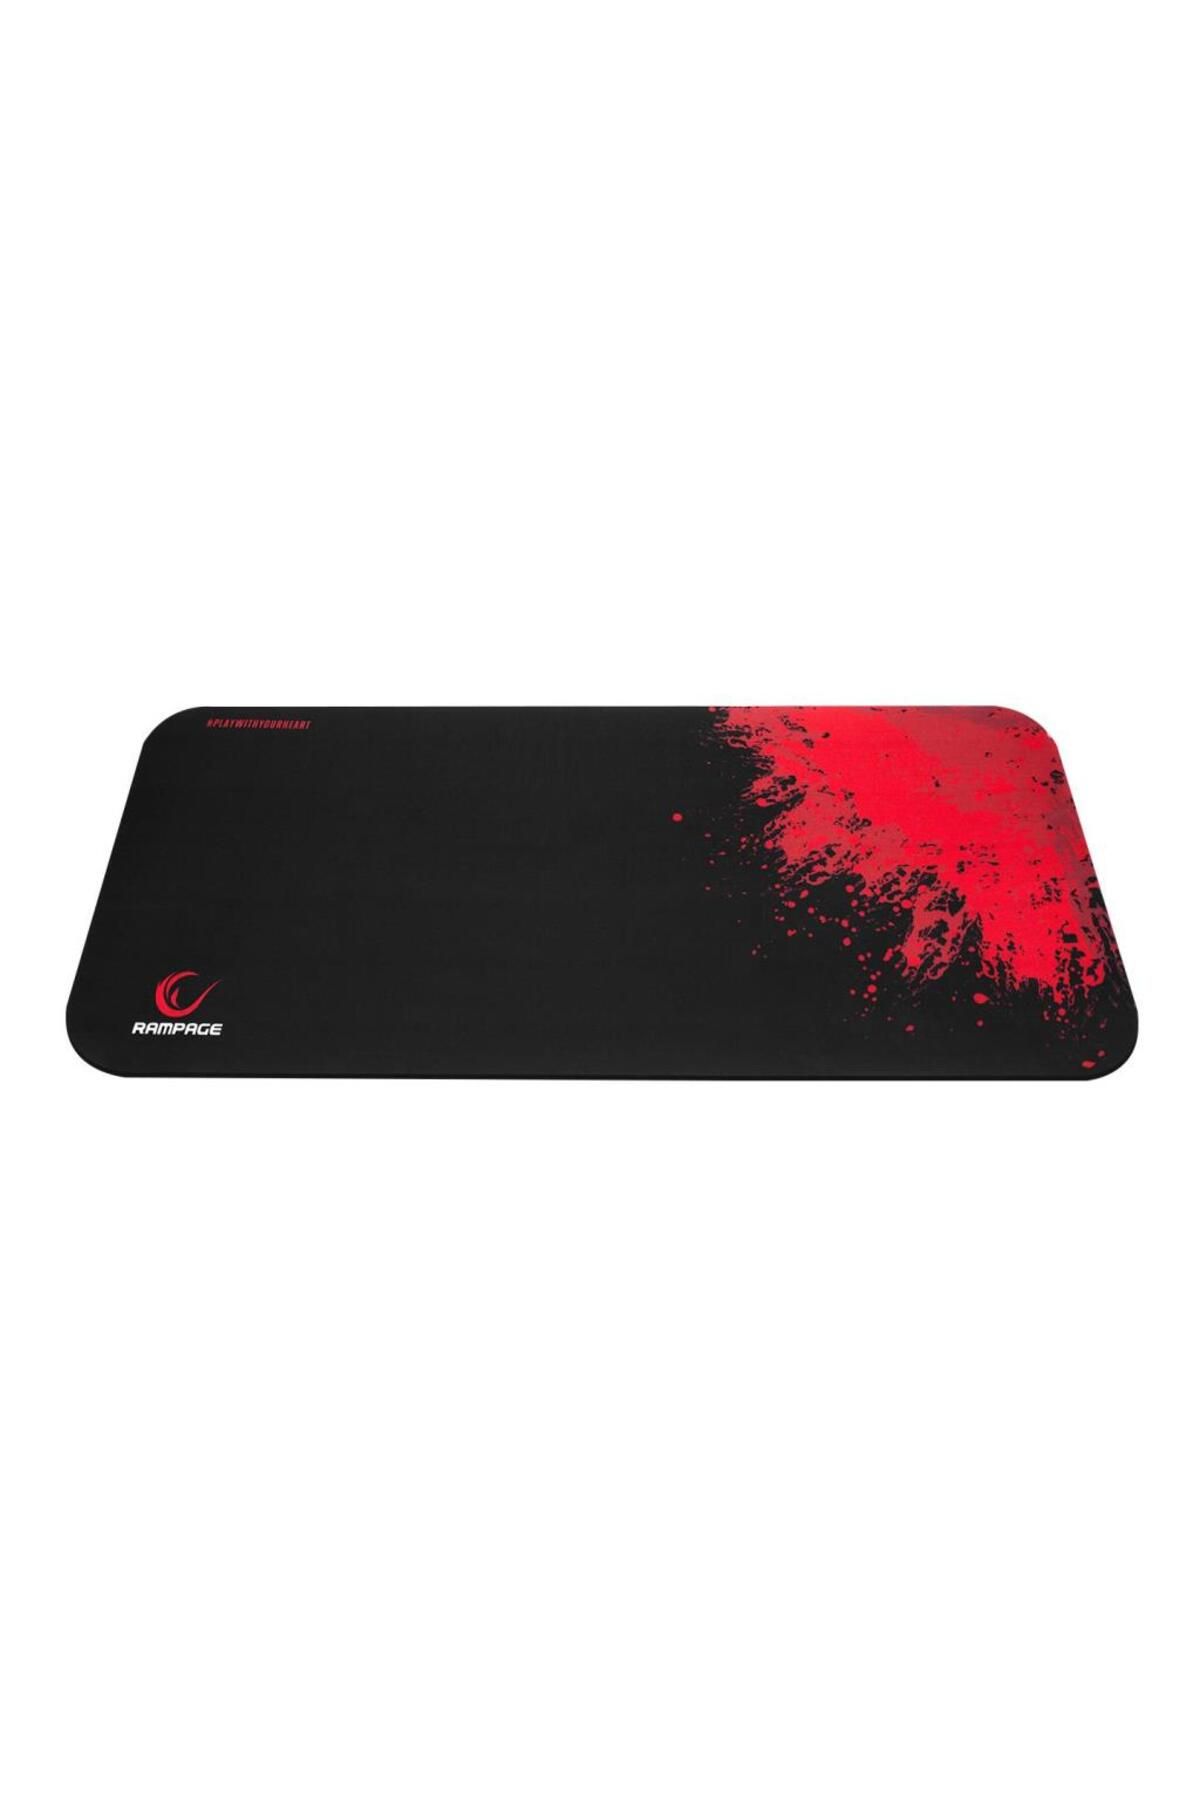 Rampage Mp-20 X-jammer 300x700x3mm Gaming Mouse Pad Siyah Desenli